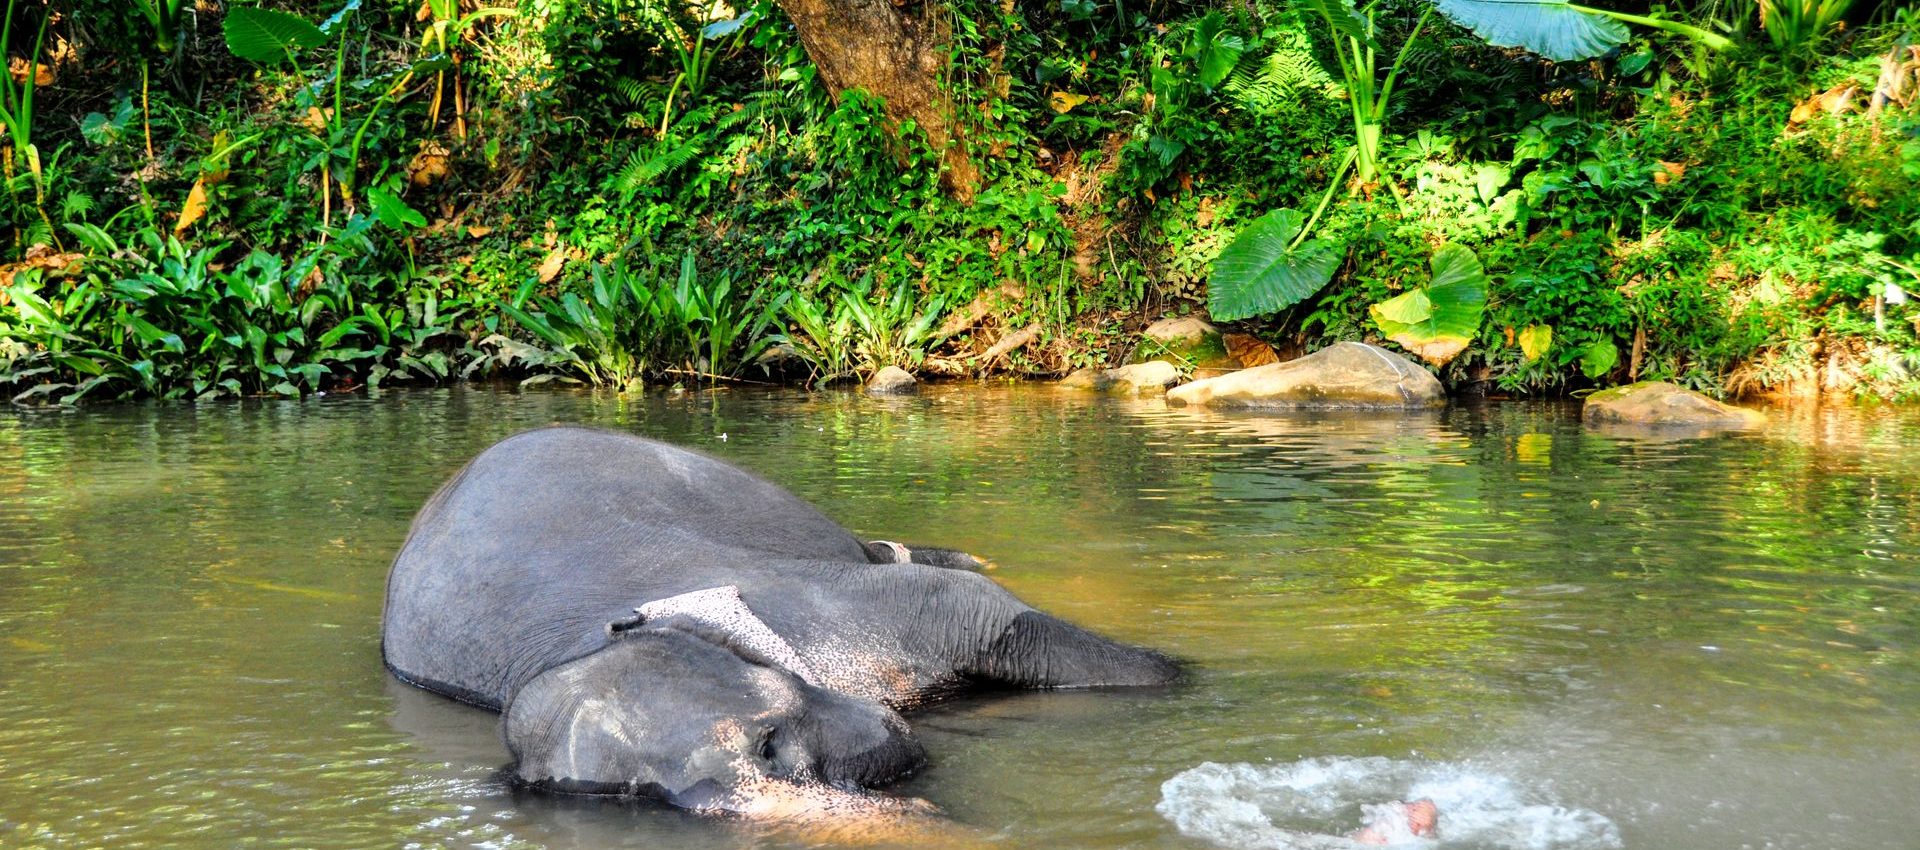 There are over 5000 elephants in Sri Lanka the highest in Asia